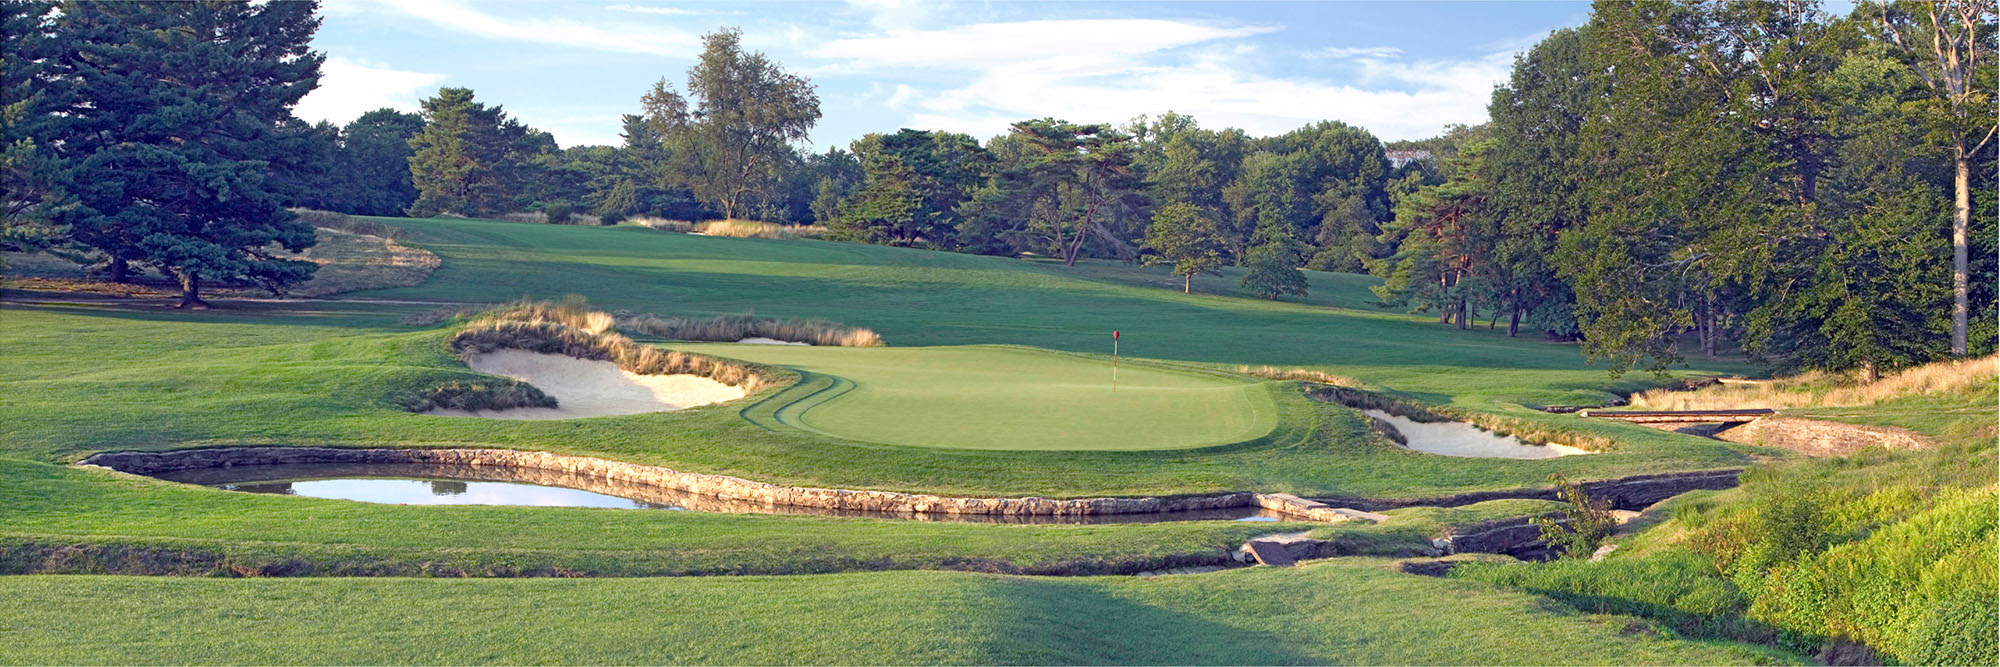 Merion East Course No. 9